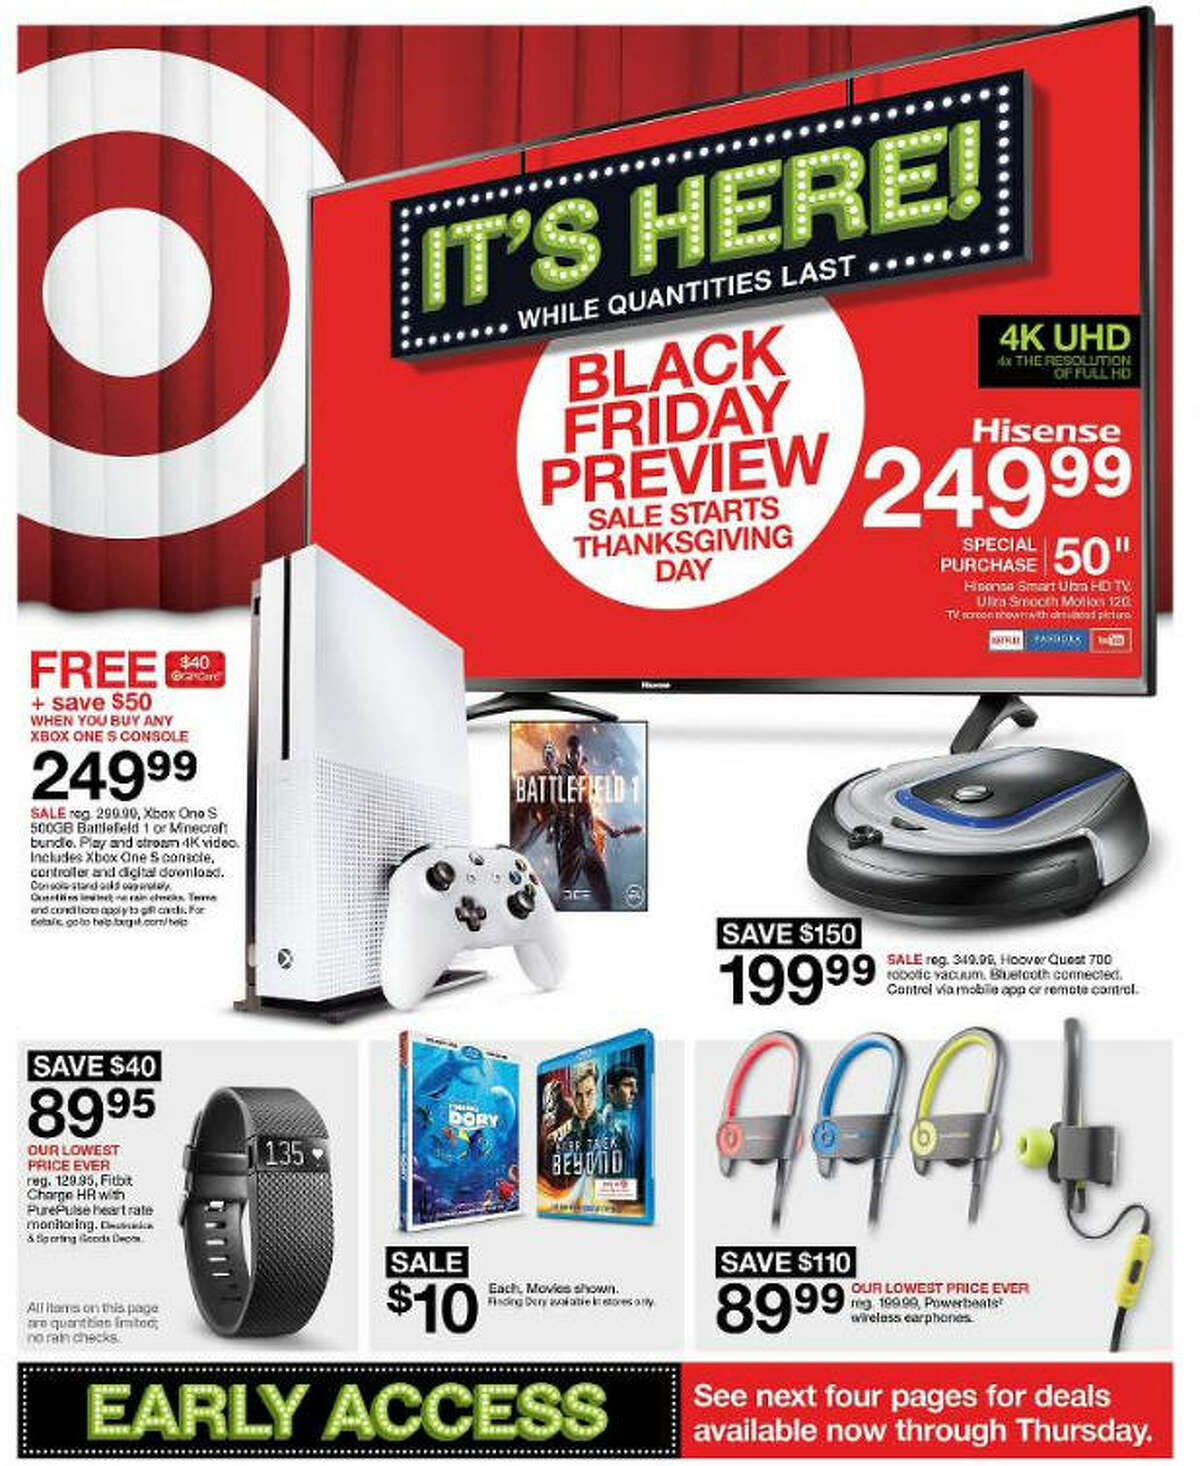 Target has released its 40-page Black Friday 2016 ad circular. "Early Access Sale" prices and promotions are valid Nov. 9-10. "10 Days of Deals" prices and promotions are valid Nov. 19-28. "Black Friday Presale" and "Doorbusters" prices and promotions valid Nov. 23-24. All prices and promotions are subject to change and availability, based on the retailer's determination.